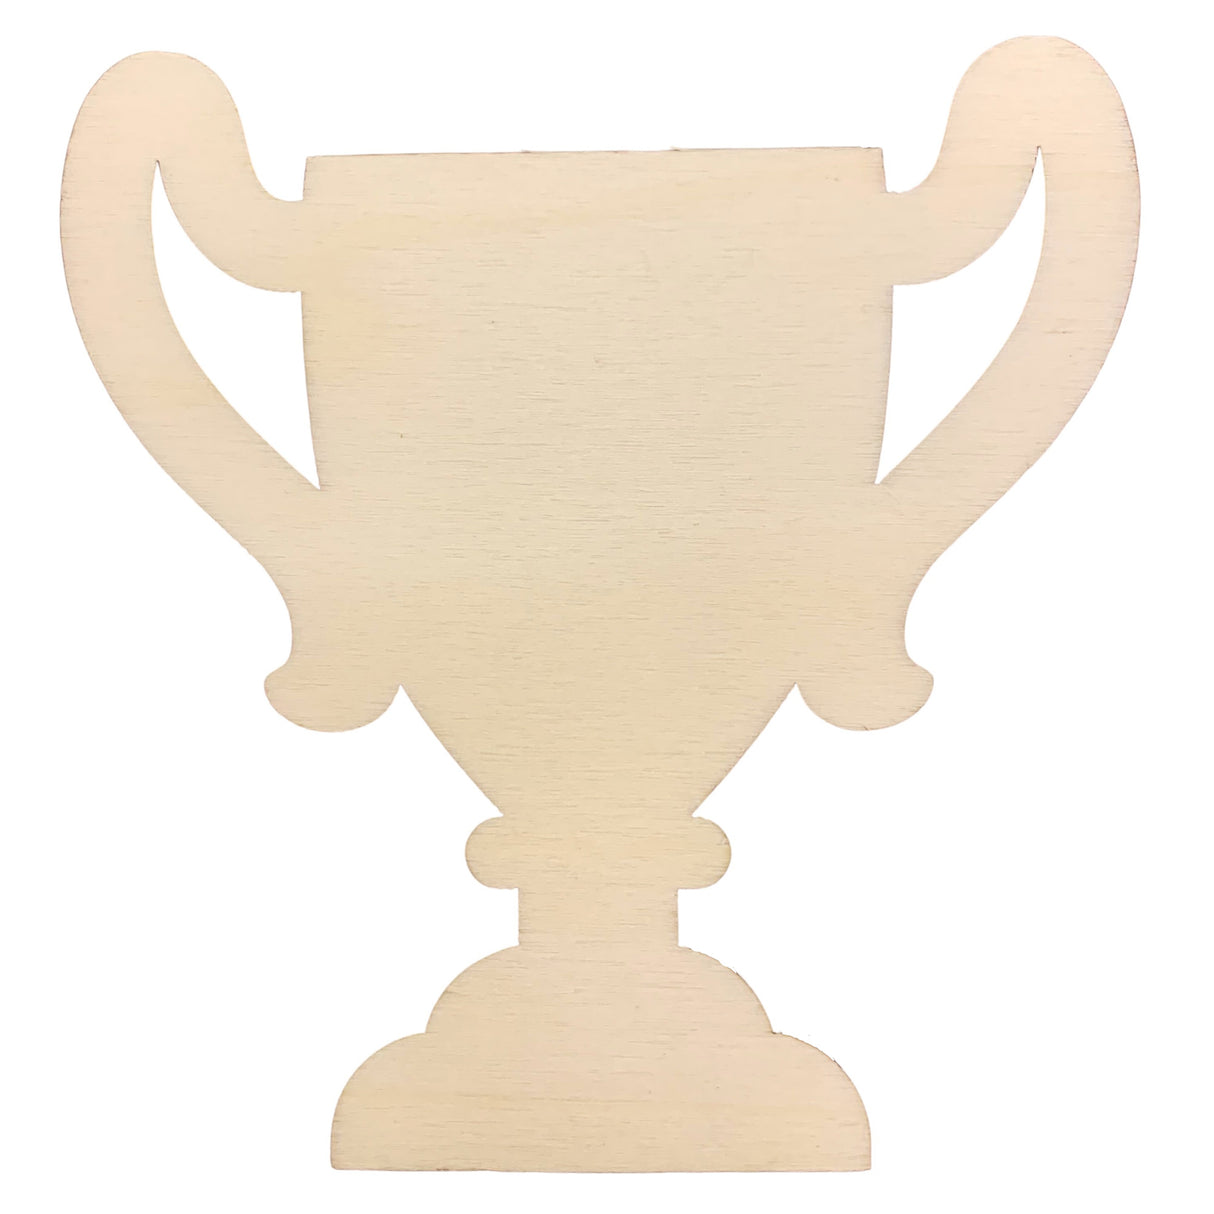 Wood Unfinished Wooden Trophy Shape Cutout DIY Craft 4.5 Inches in Beige color